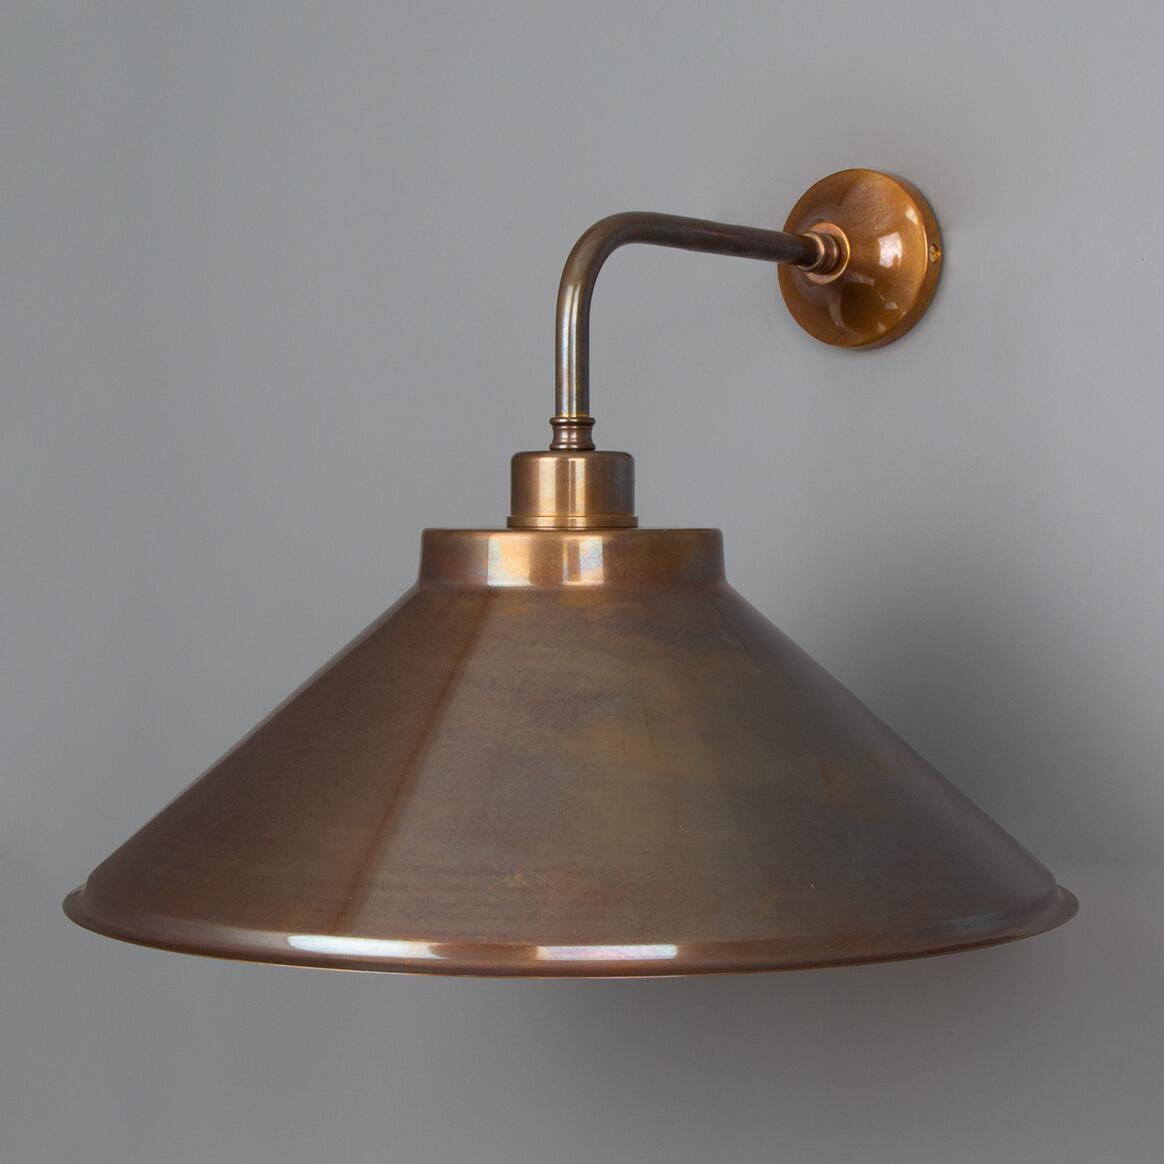 Rio Vintage Wall Light with Brass Cone Shade 15